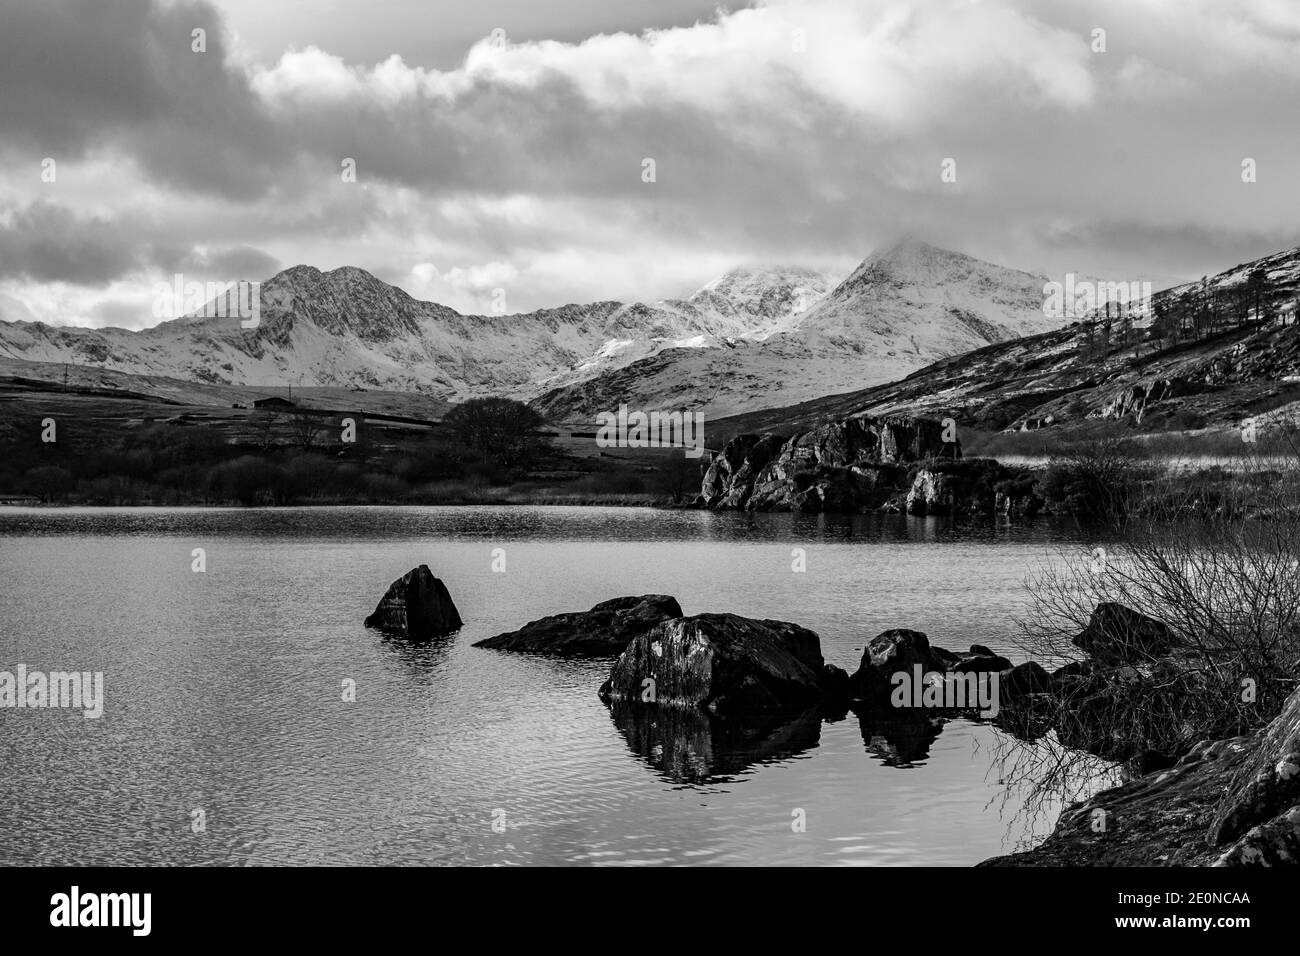 Looking down Llynnau Mymbyr lake towards Snowdon covered in snow. The lake is situated on the road to Capel Curig. Stock Photo